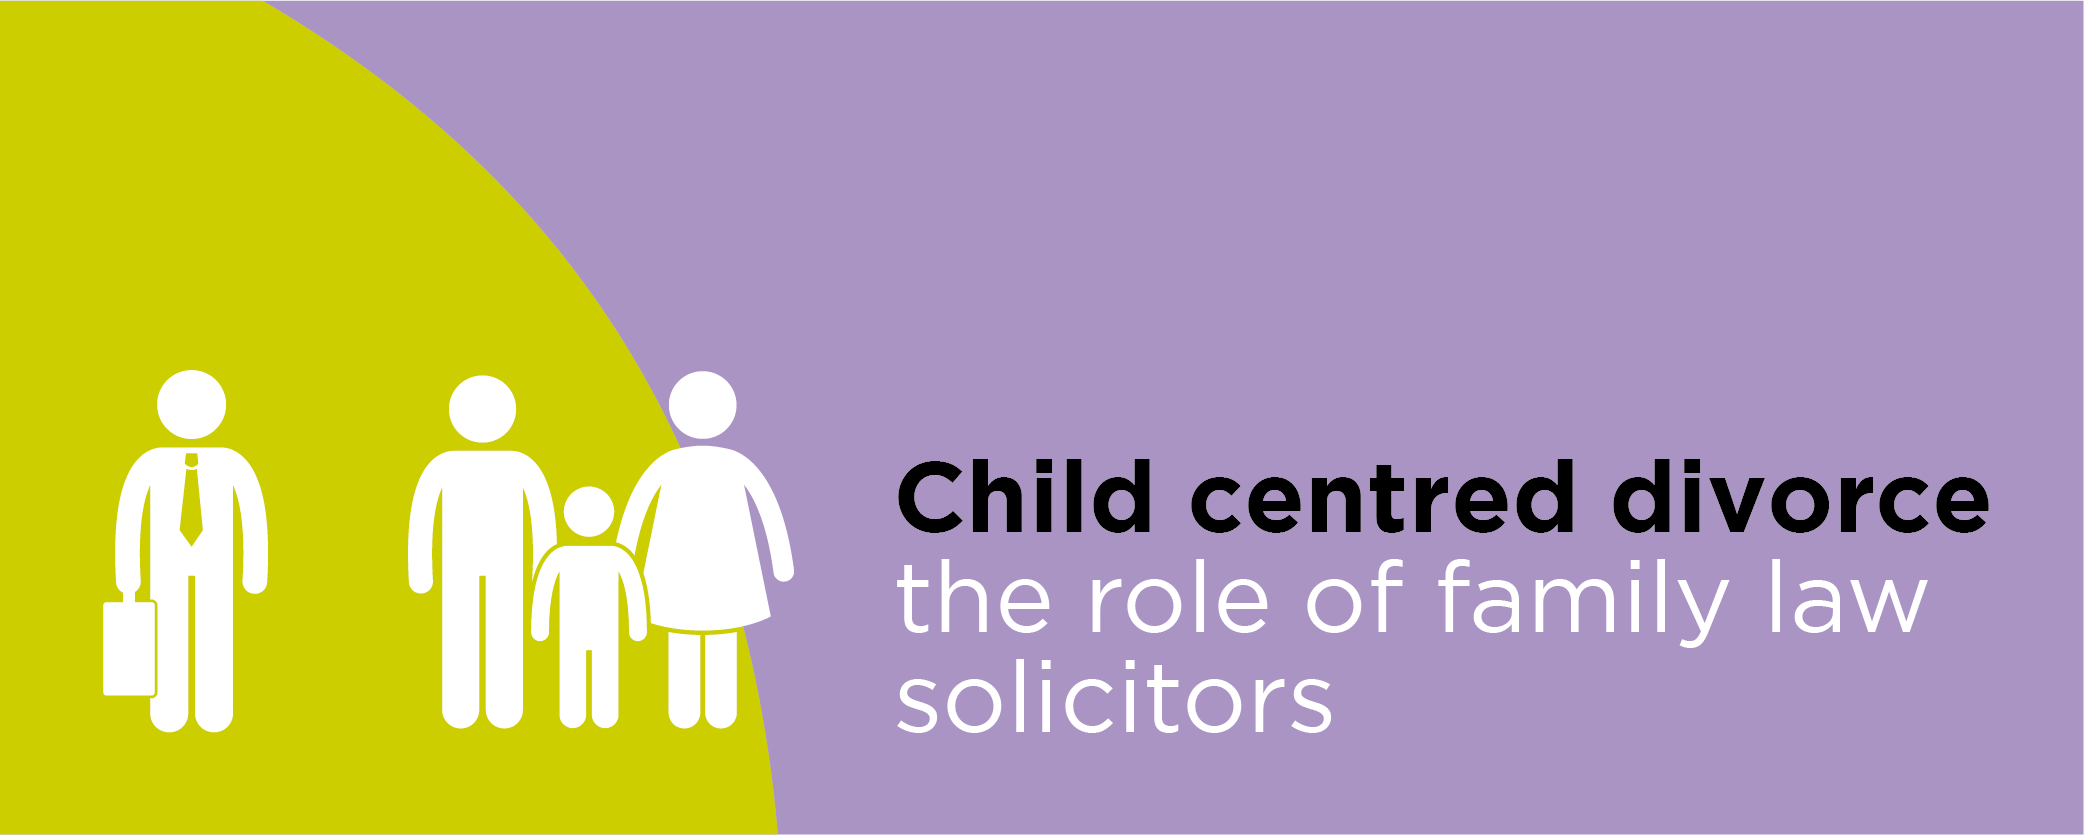 Child centred divorce: the role of family law solicitors